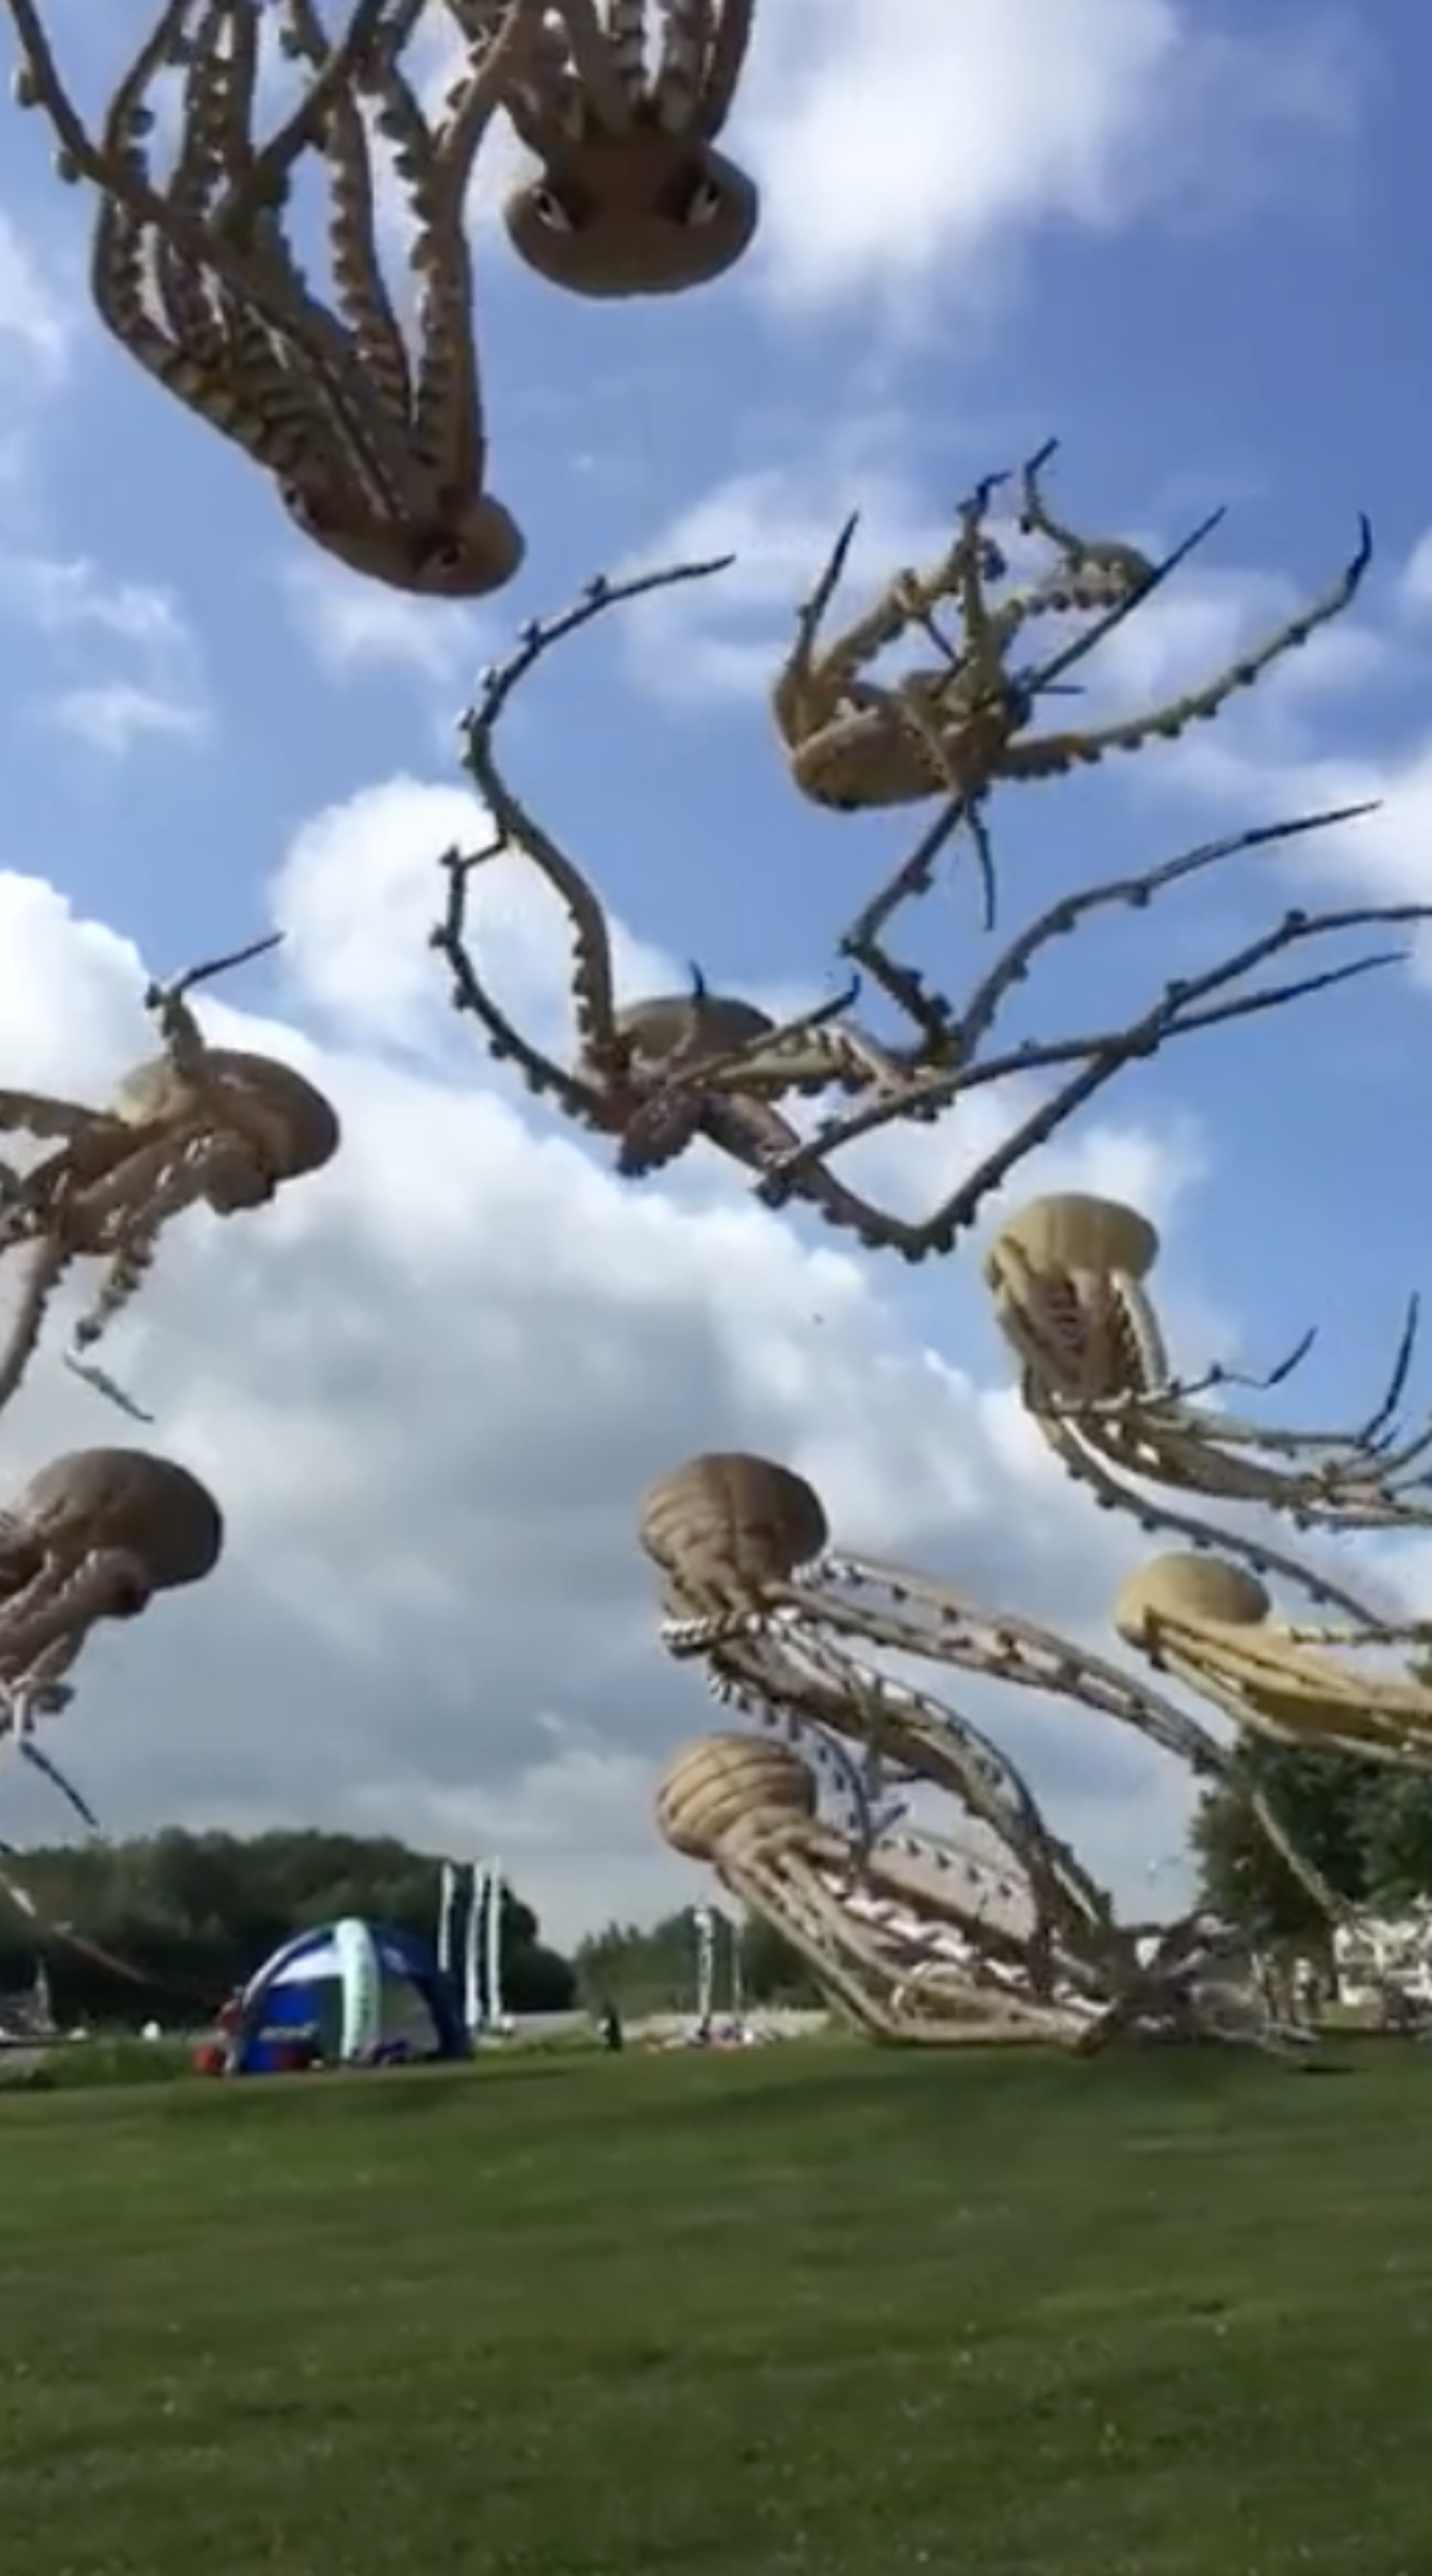 large kites in the shape of octopus